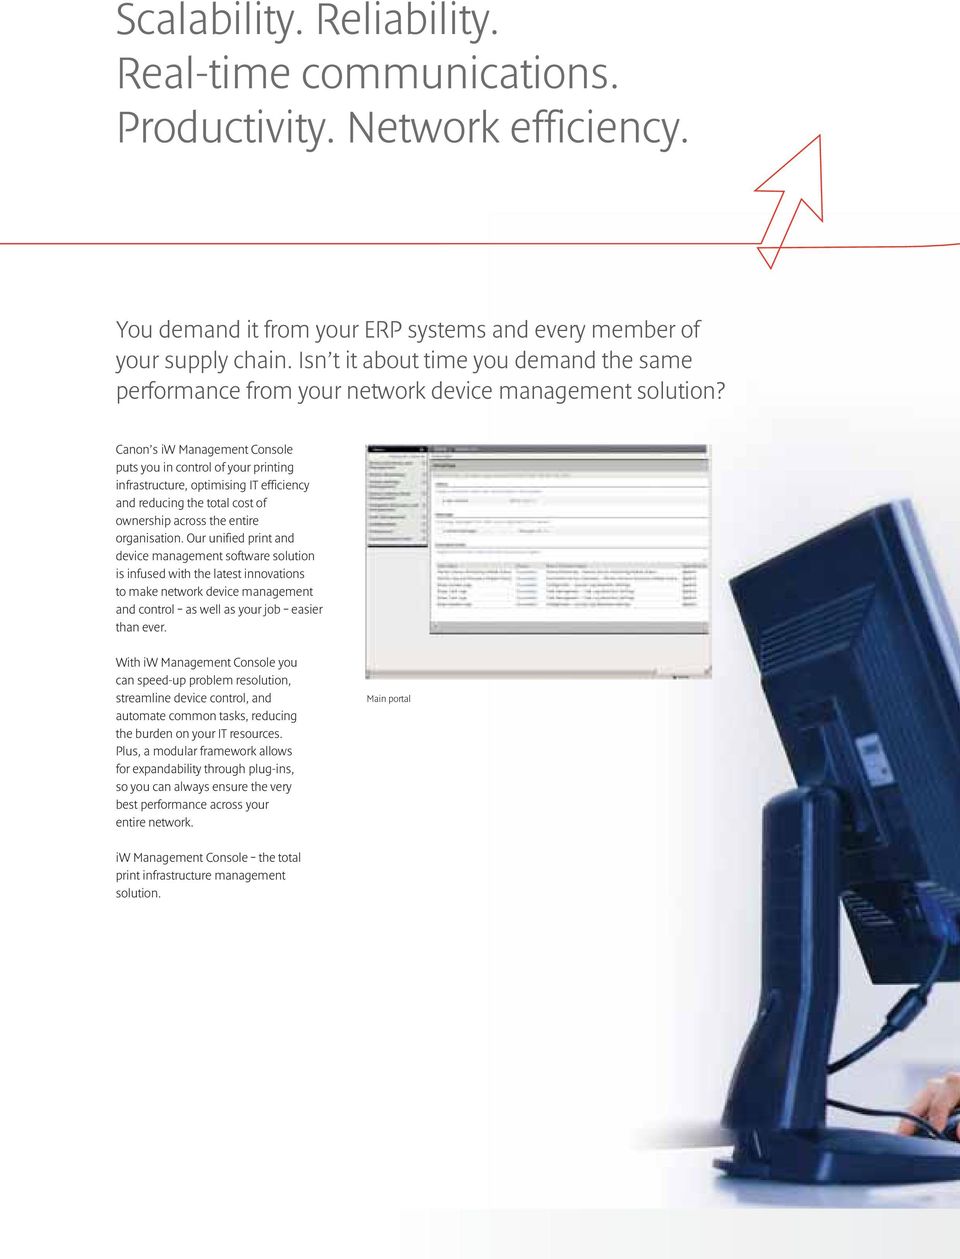 Canon s iw Management Console puts you in control of your printing infrastructure, optimising IT efficiency and reducing the total cost of ownership across the entire organisation.